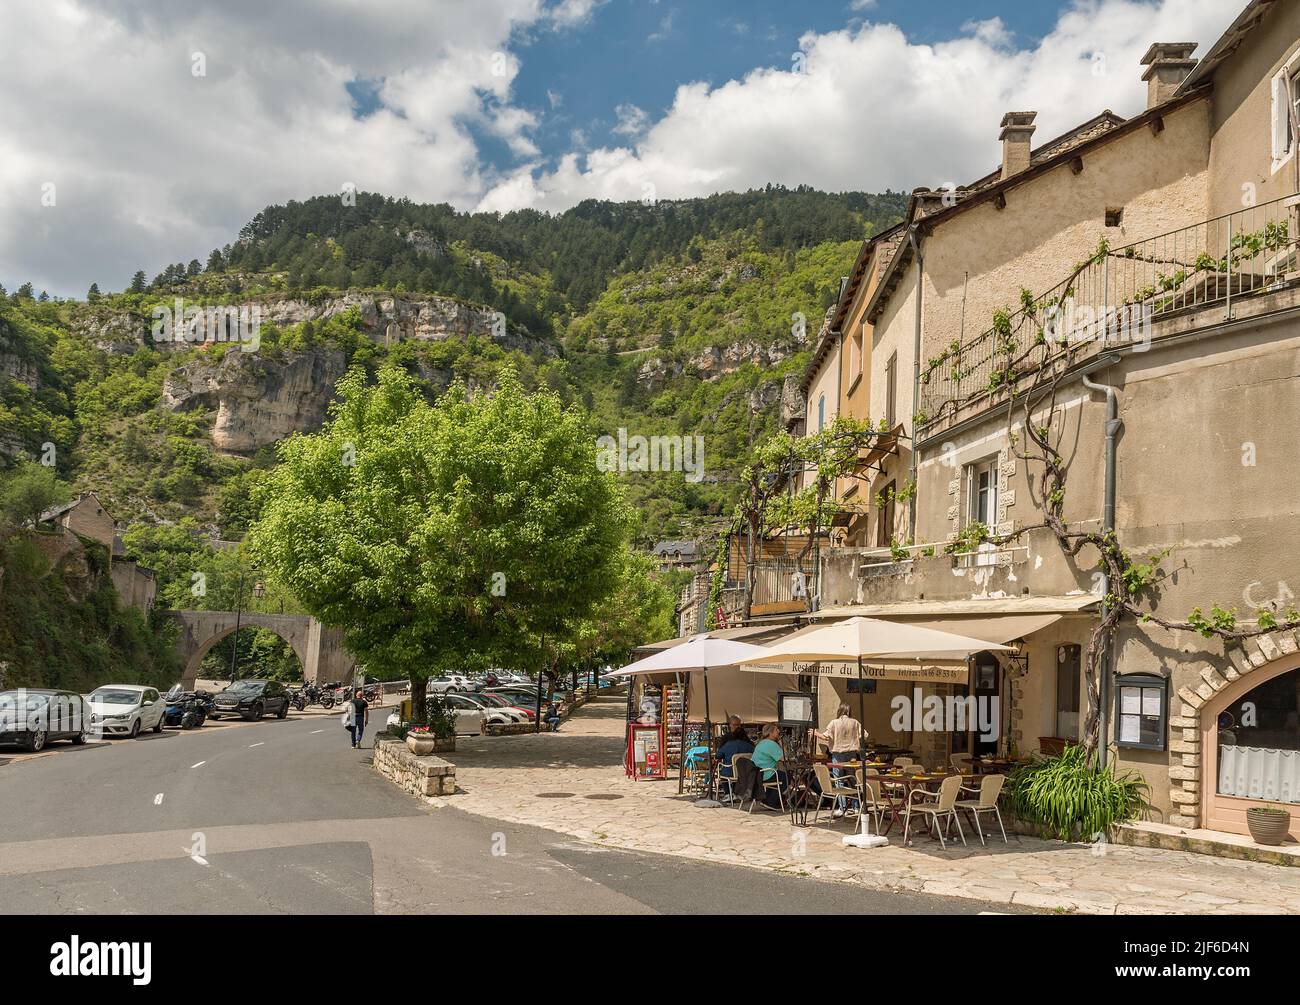 Cafe and restaurant in Sainte-Enimie, Gorges du Tarn, Occitania, France Stock Photo